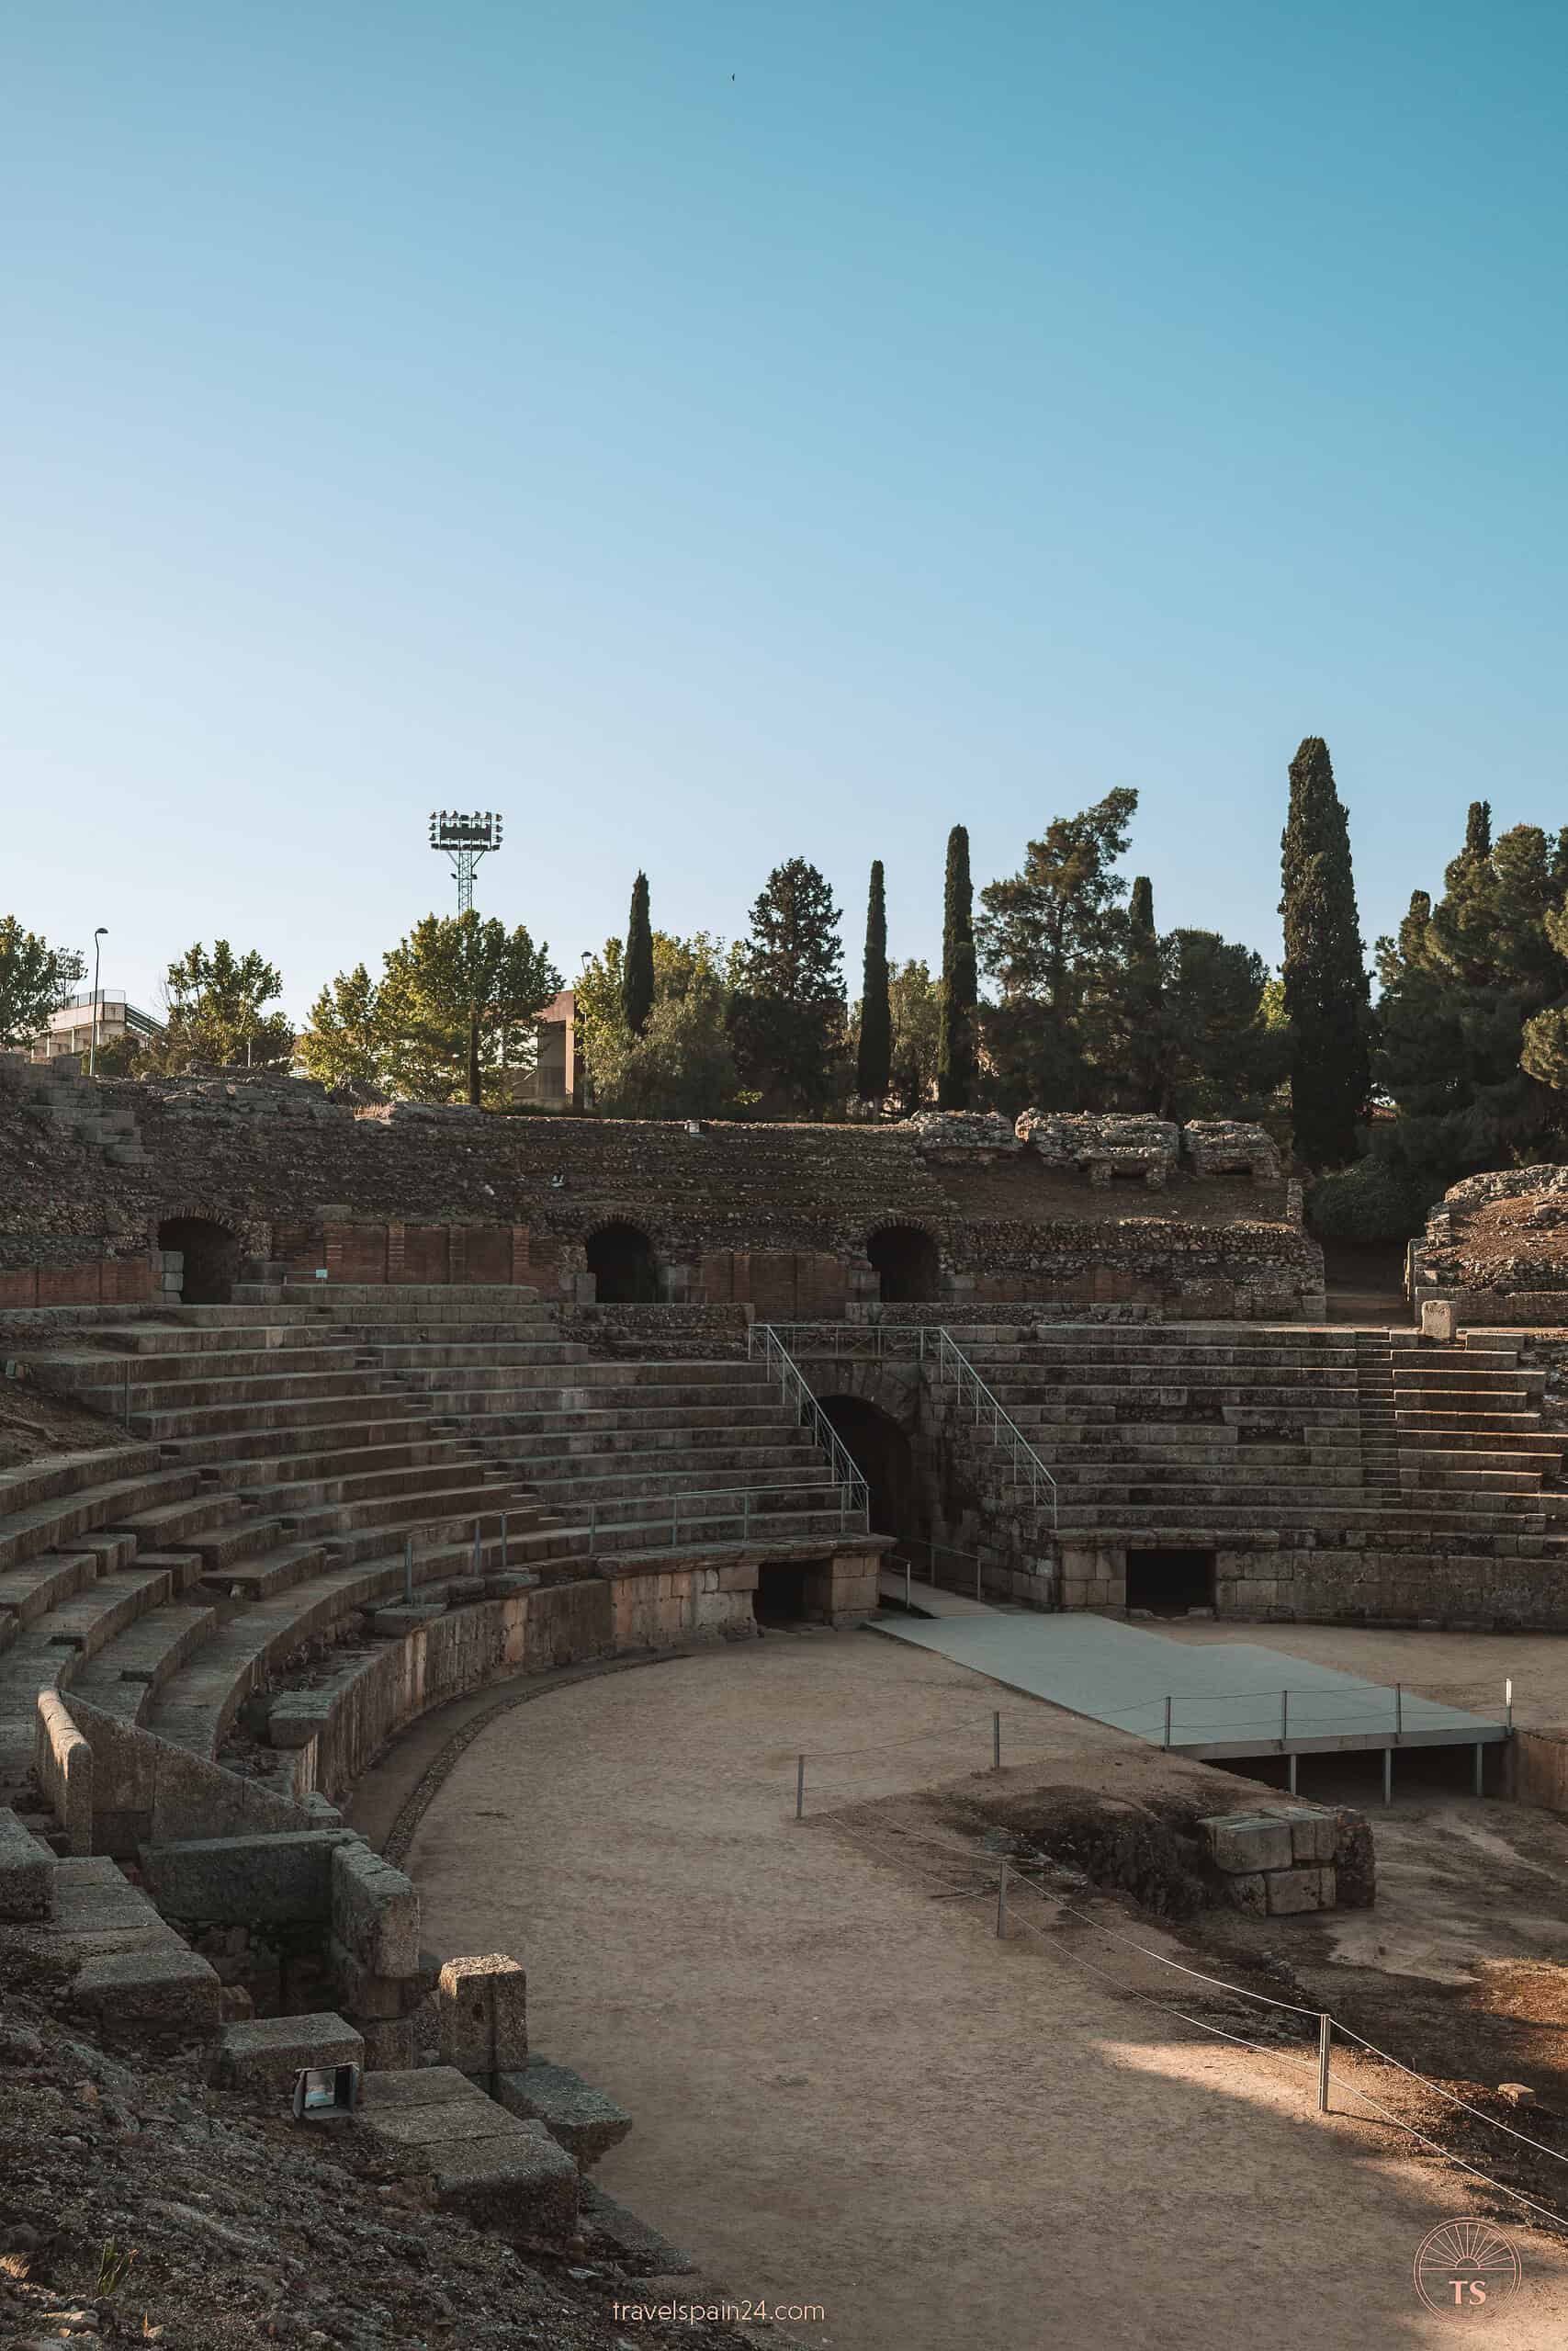 The ancient Roman amphitheater in Mérida, once a venue for gladiator fights, captured in its majestic ruinous state, a testament to the city's rich historical past.